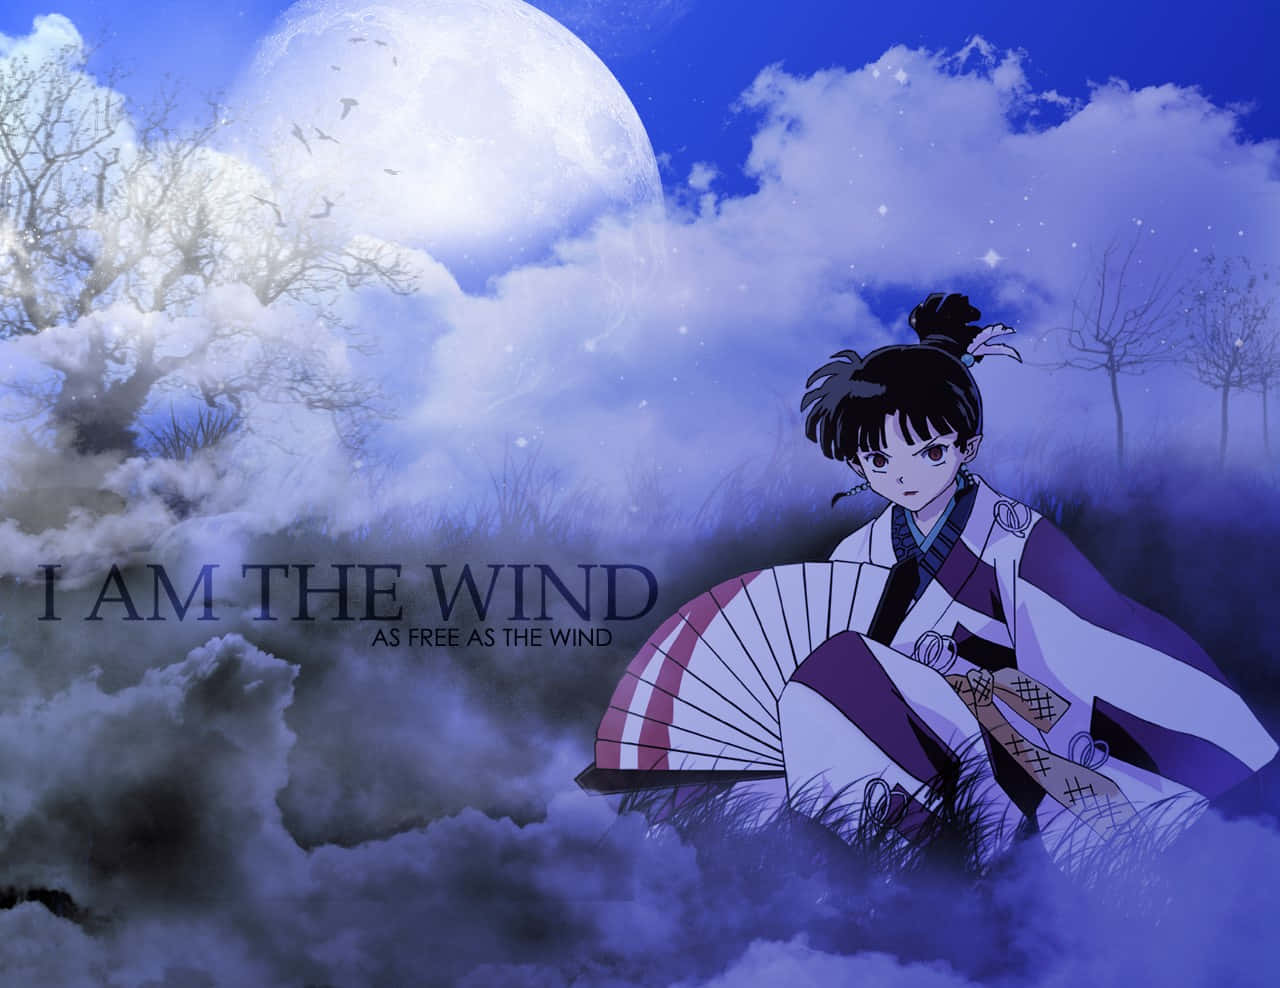 Kagura of the Wind unleashes her power in the mystical world of Inuyasha Wallpaper